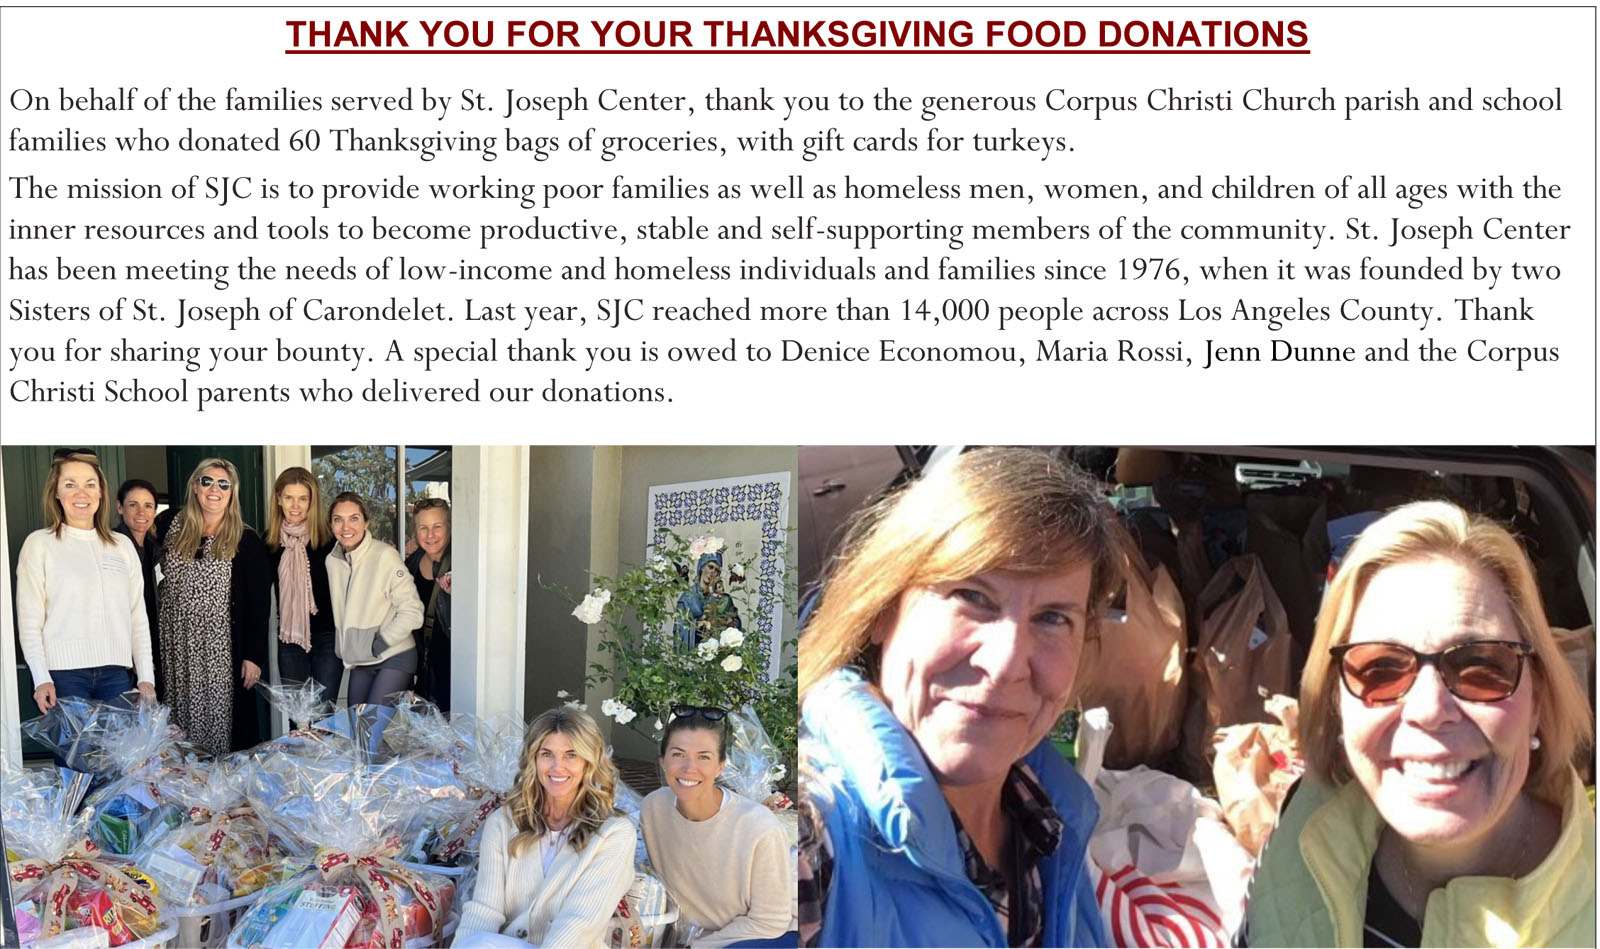 Thank you for the Thanksgiving Donations